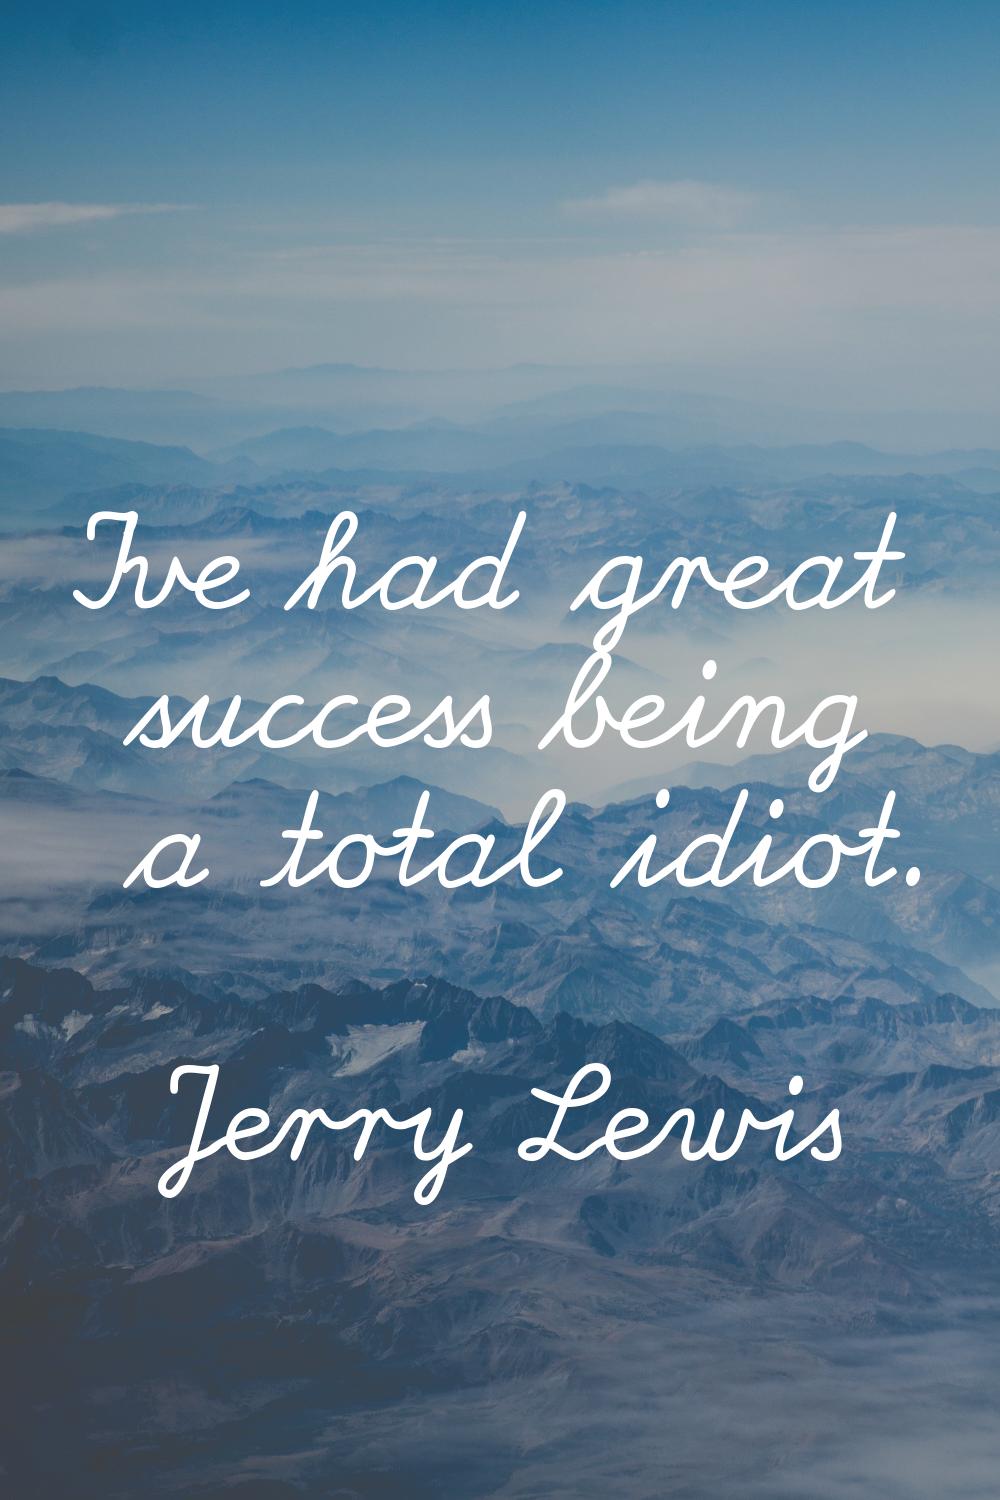 I've had great success being a total idiot.